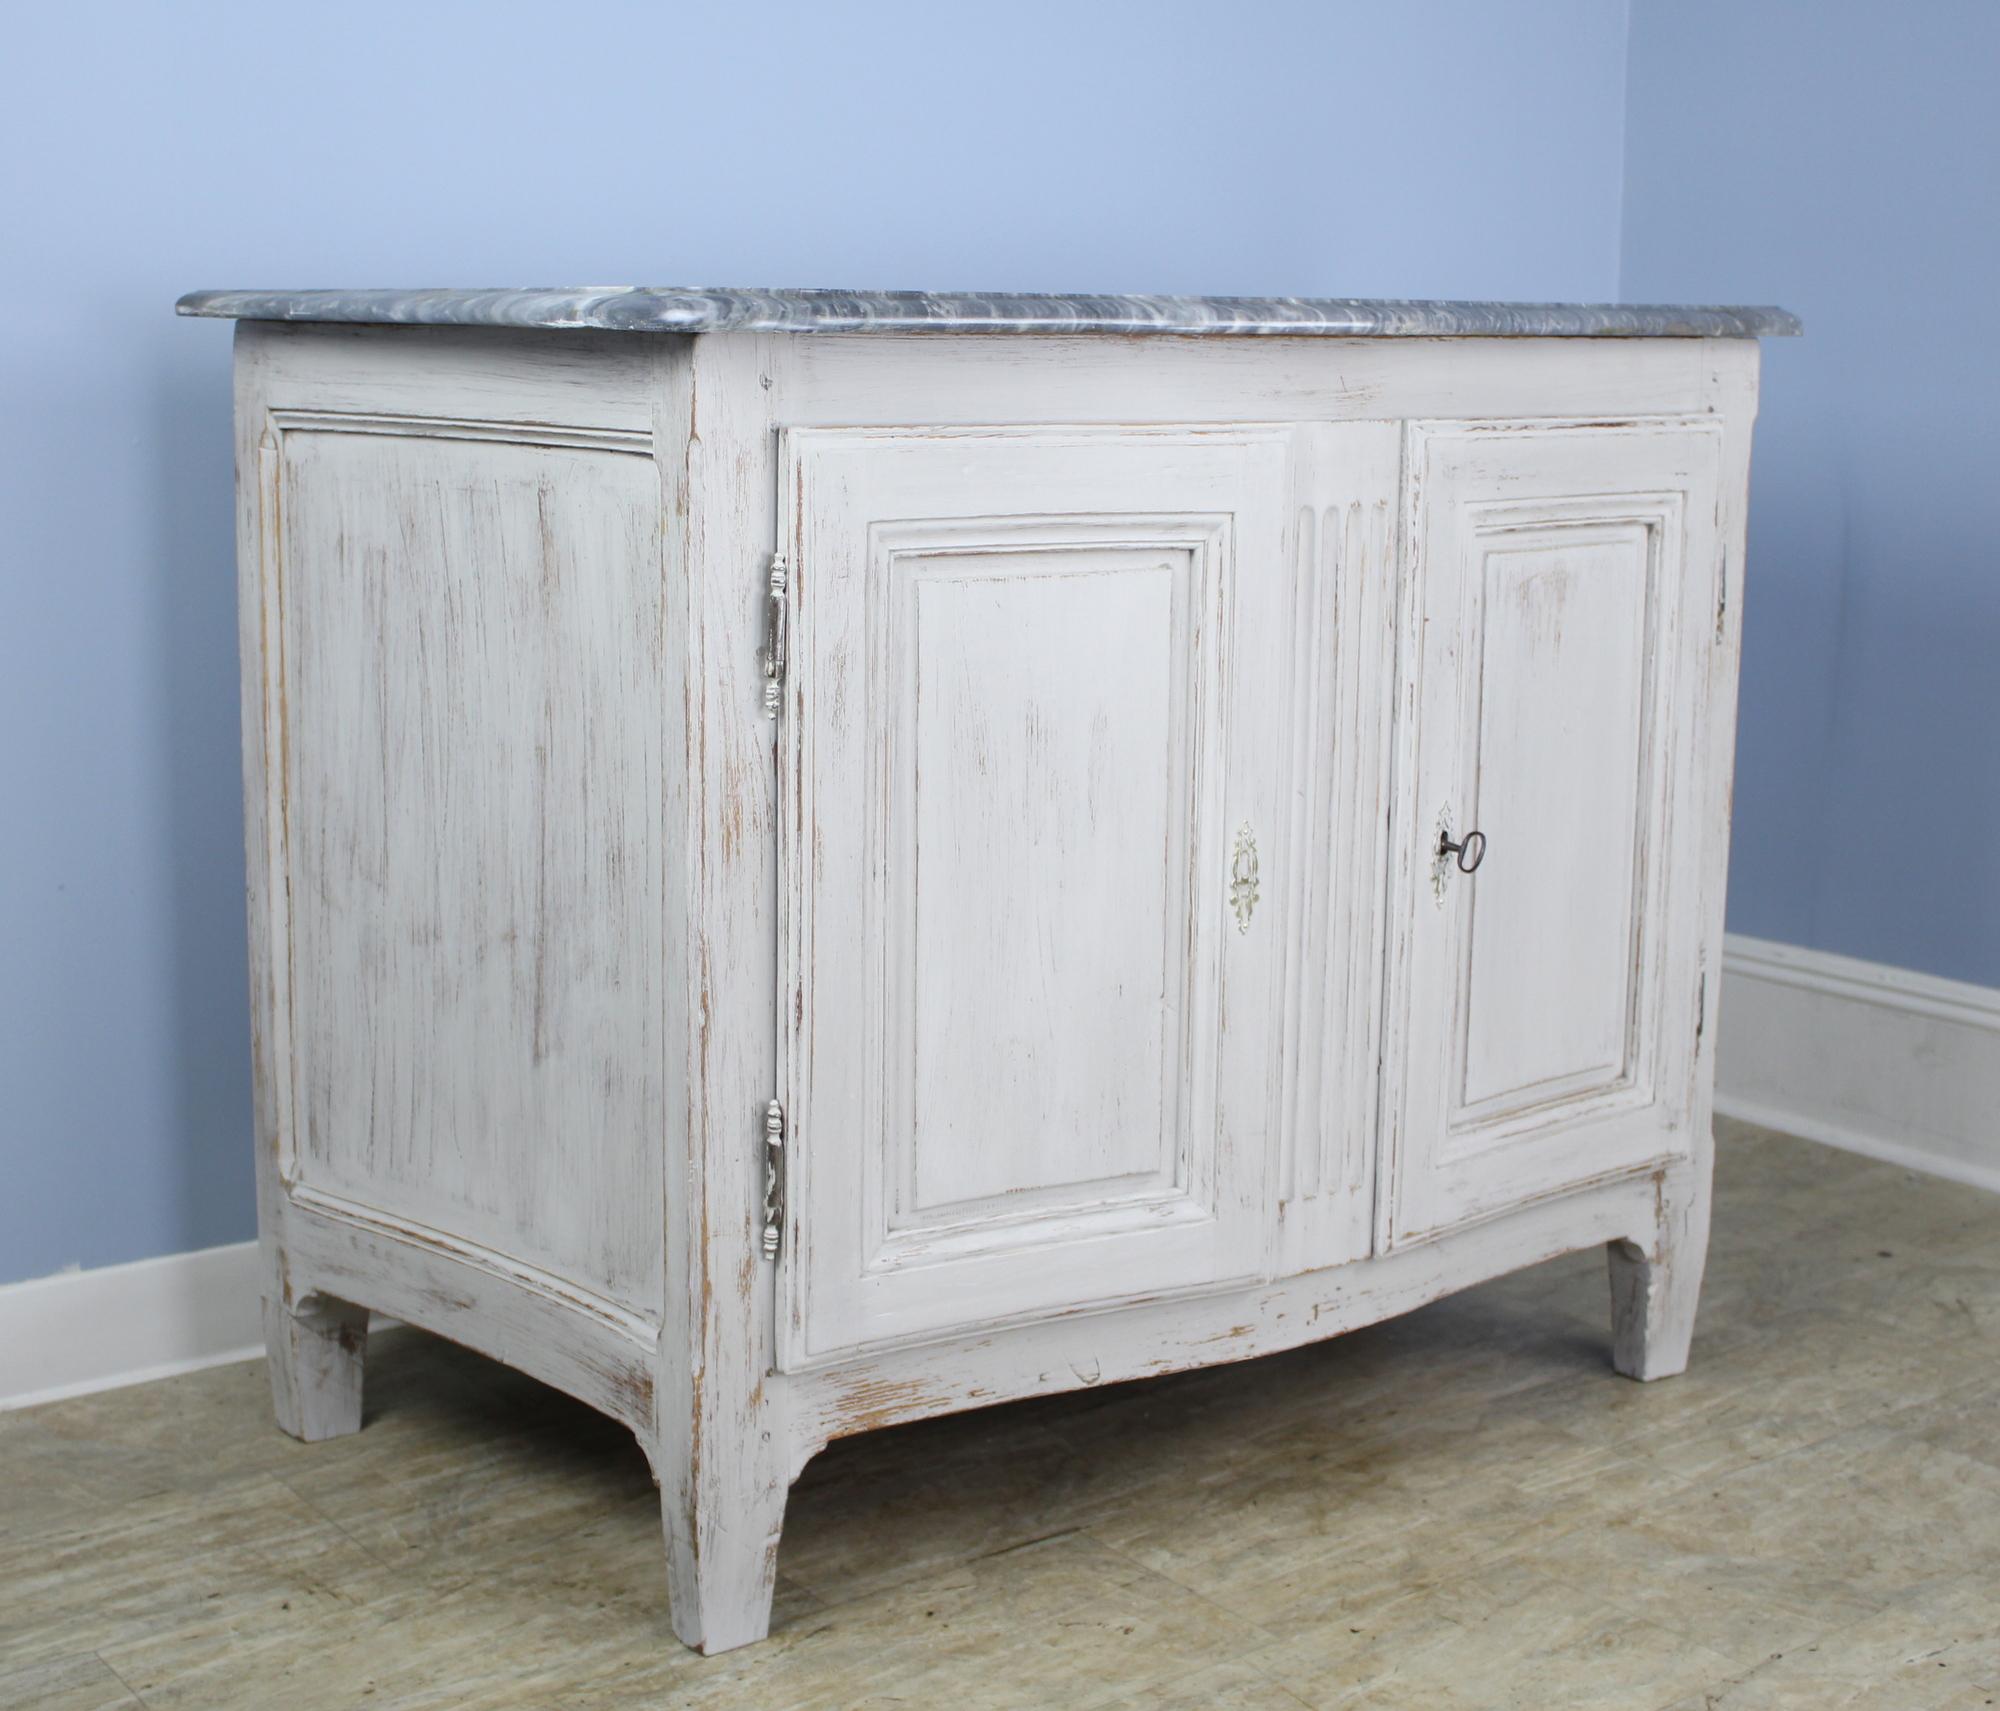 A handsome bowfront buffet, with original bright gray marble and newly painted in faux distressed white. The single interior shelf is not adjustable. The piece closes securely with an interior latch and lock and key. Marble is in good condition for